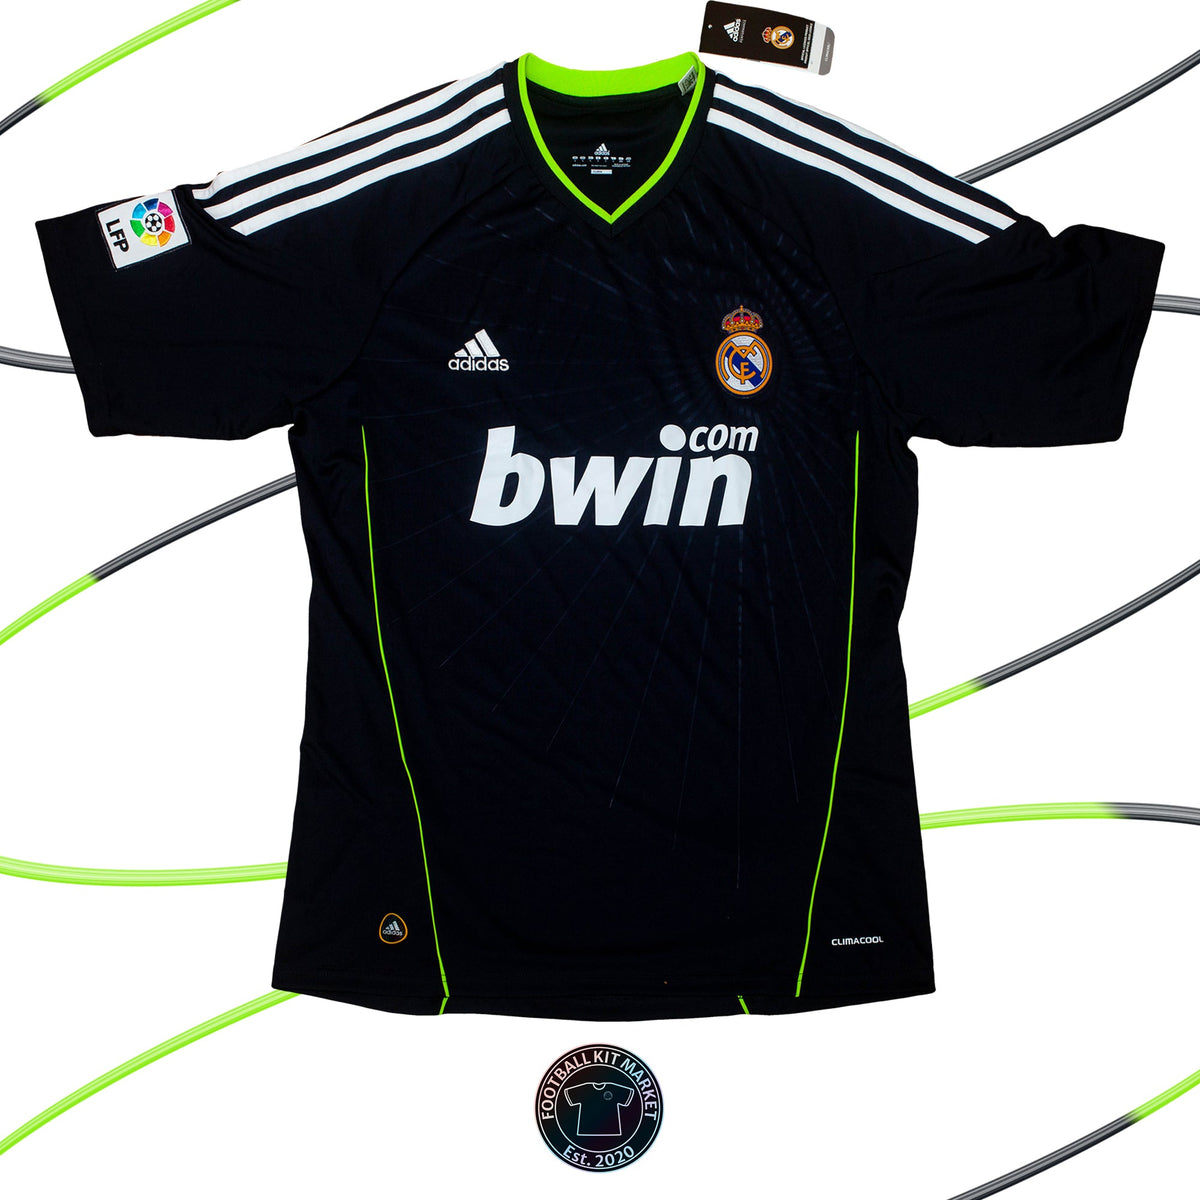 Genuine REAL MADRID Away Shirt (2010-2011) - ADIDAS (L) - Product Image from Football Kit Market